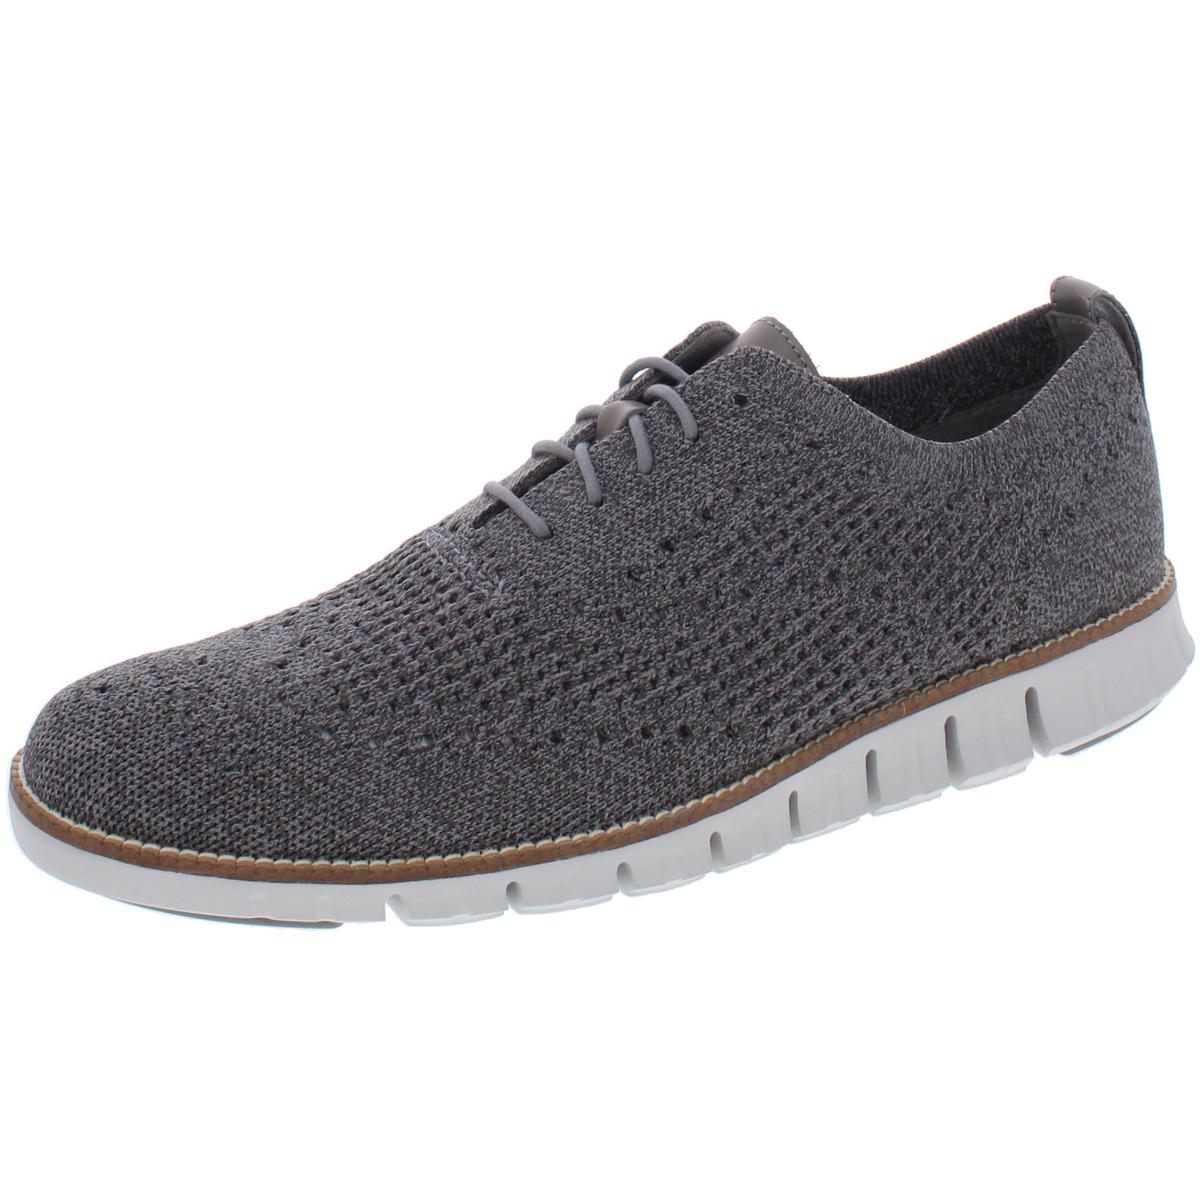 Cole Haan Mens ZeroGrand Stitchlite Knit Lace-Up Oxfords Sneakers BHFO ...